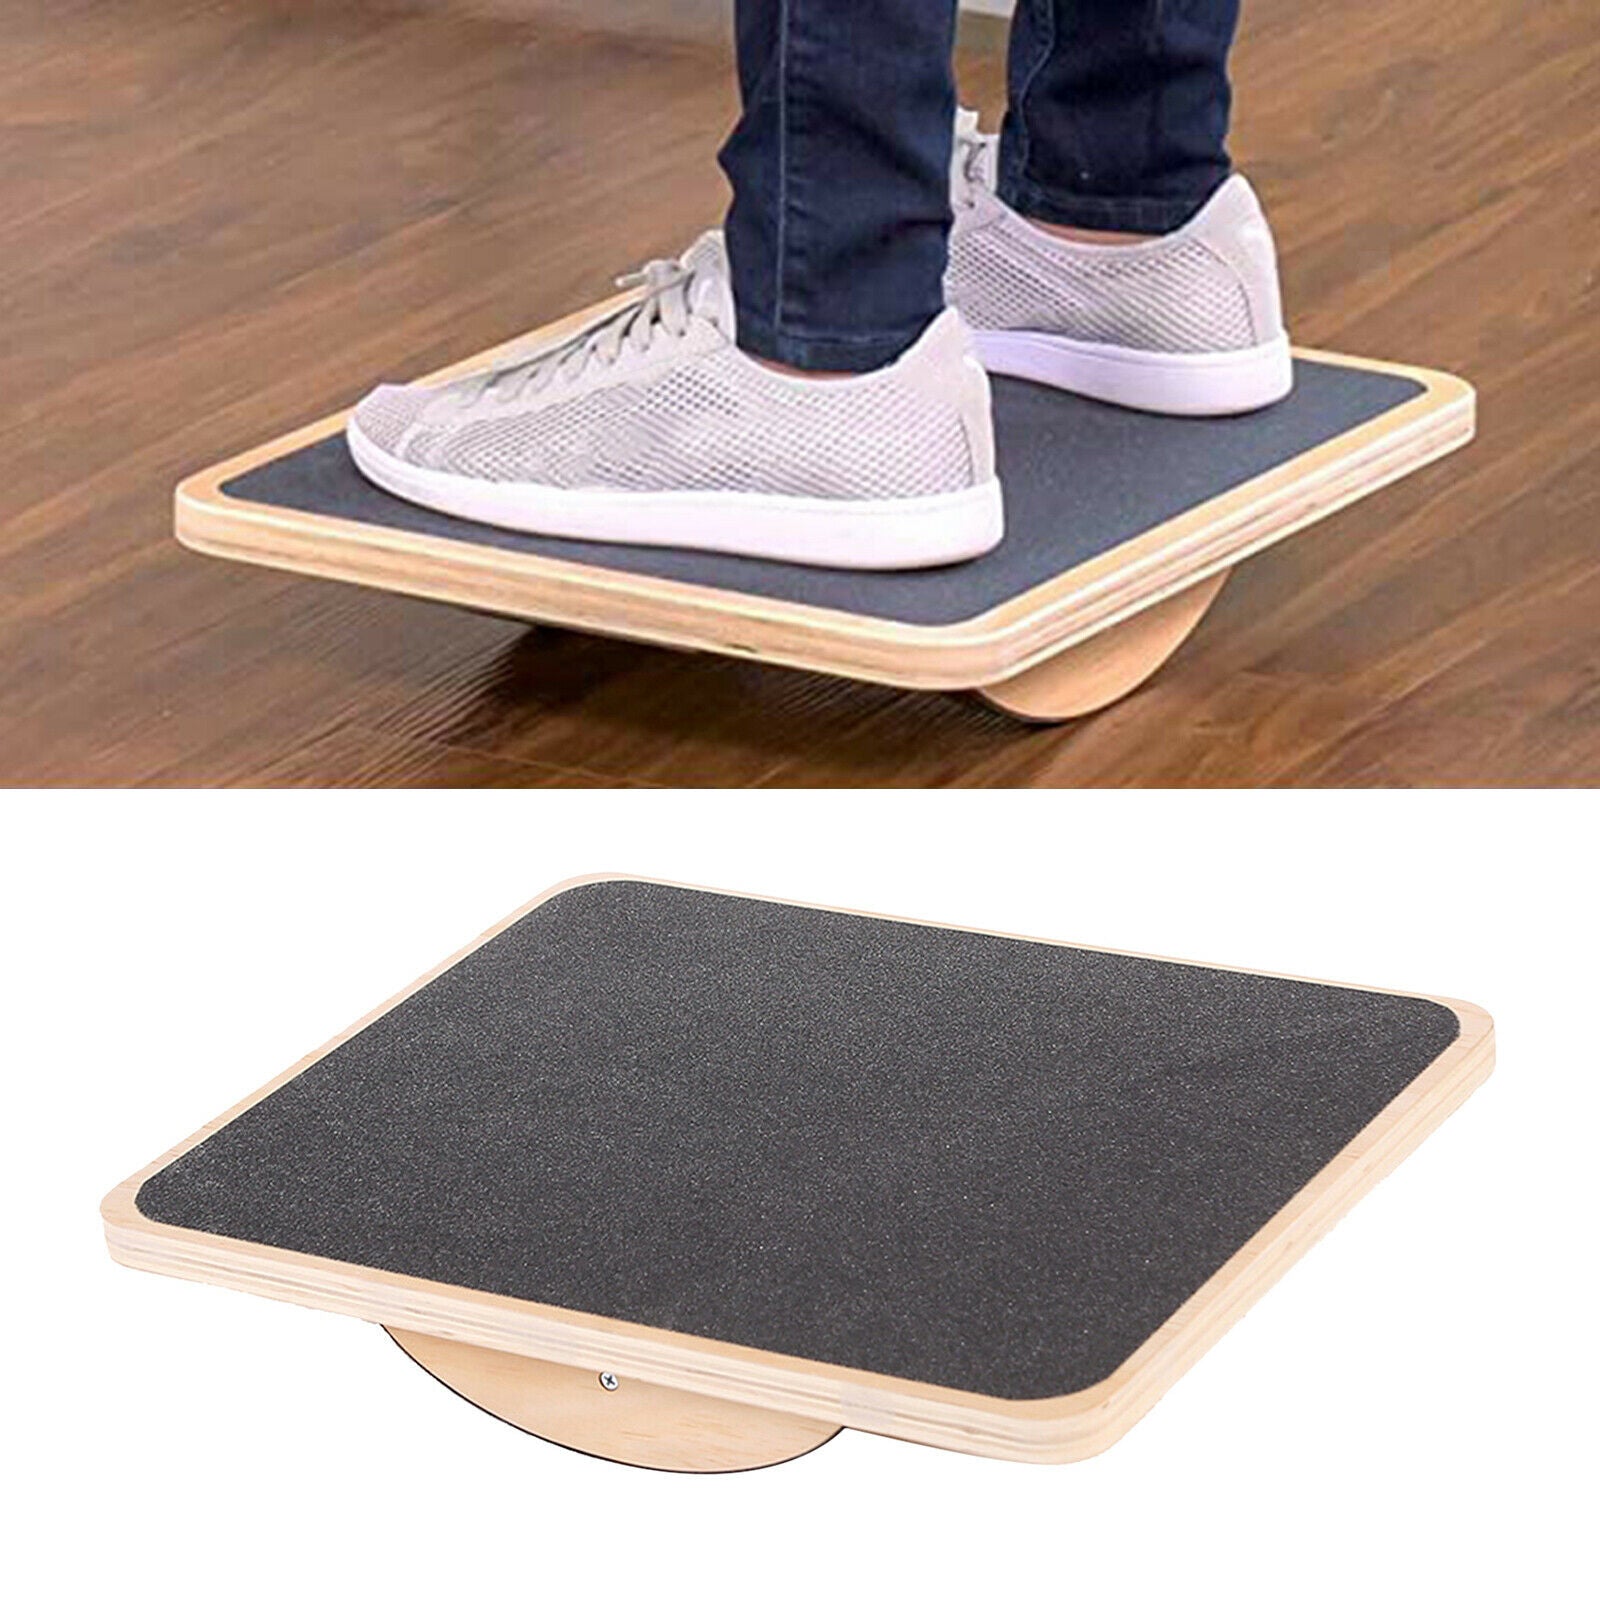 Wood Fitness Wobble Balance Board Exercise Fitness Gym Wood